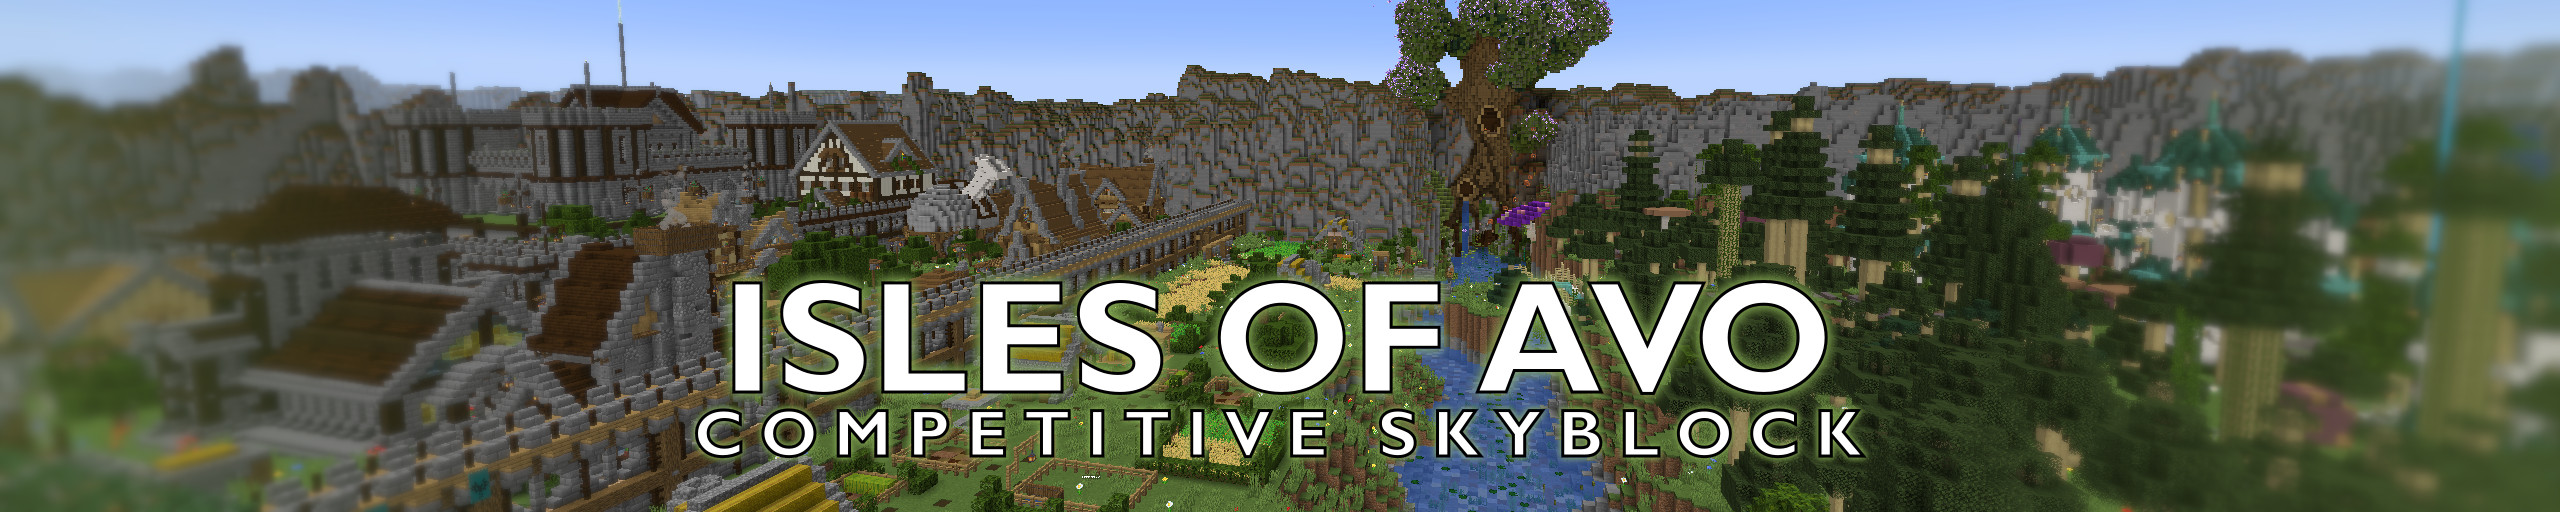 Banner image - Isles of Avo: Competitive Skyblock